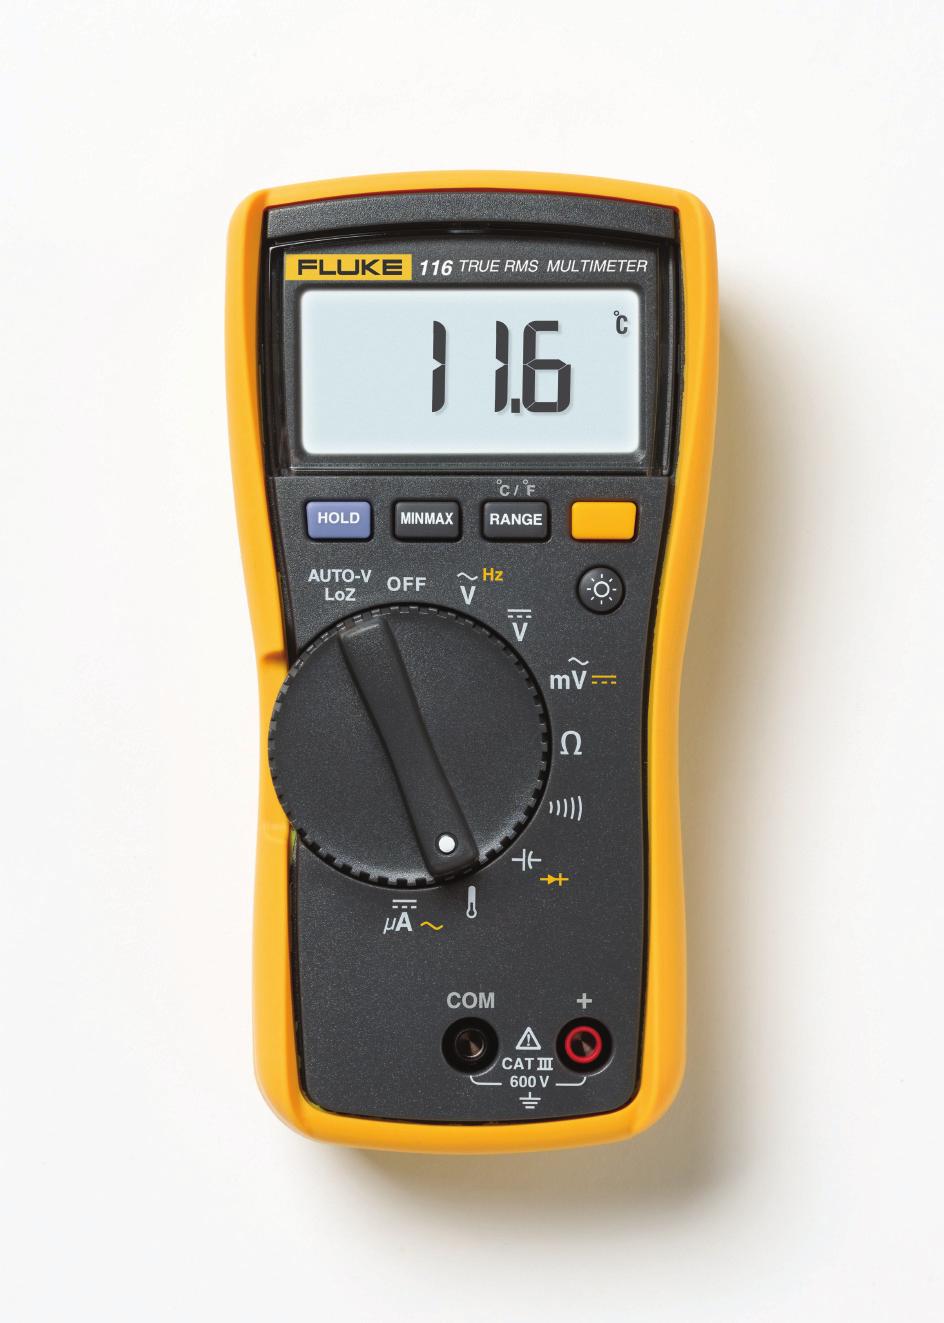 Fluke 116 HVAC Multimeter with Temperature and Microamps Technical Data Compact true-rms meter for HVAC troubleshooting The Fluke 116 was specifically designed for the HVAC professional.